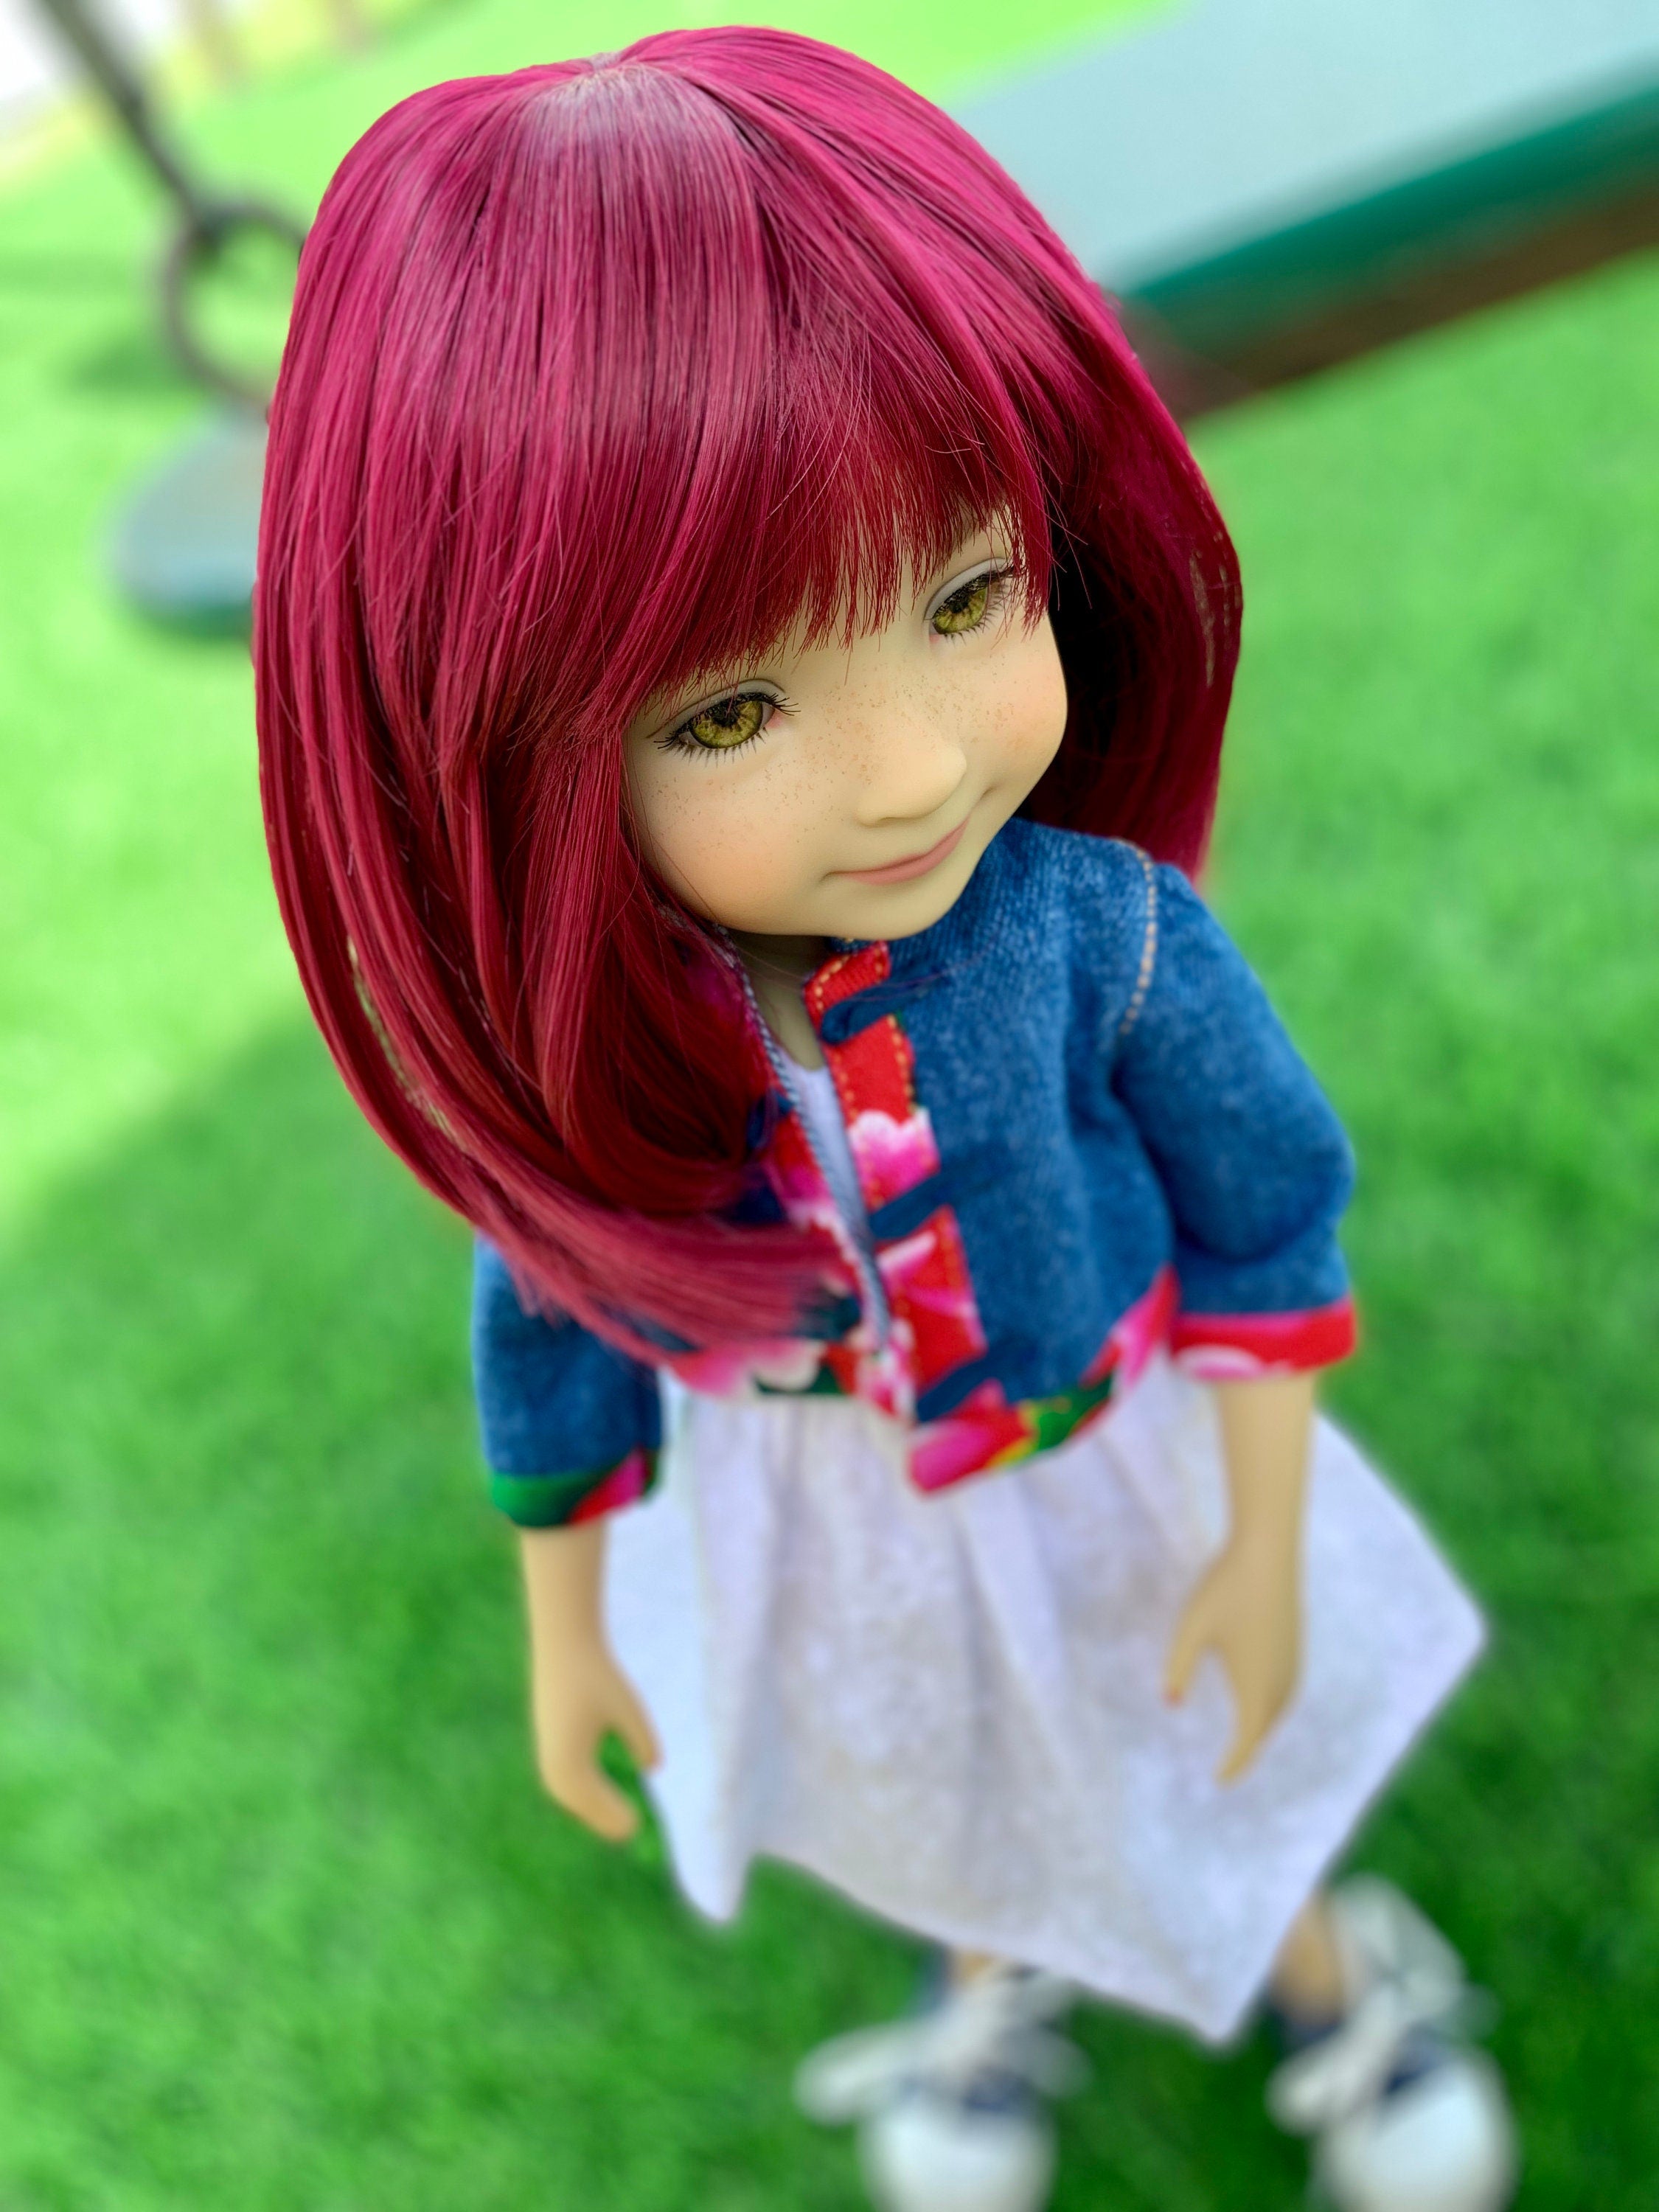 Custom doll WIG for 14"  Dolls - Heat Safe-Tangle Resistant-fits 8-9" head size Kaye Wiggs Ruby Red Fashion Friends girls of the orient